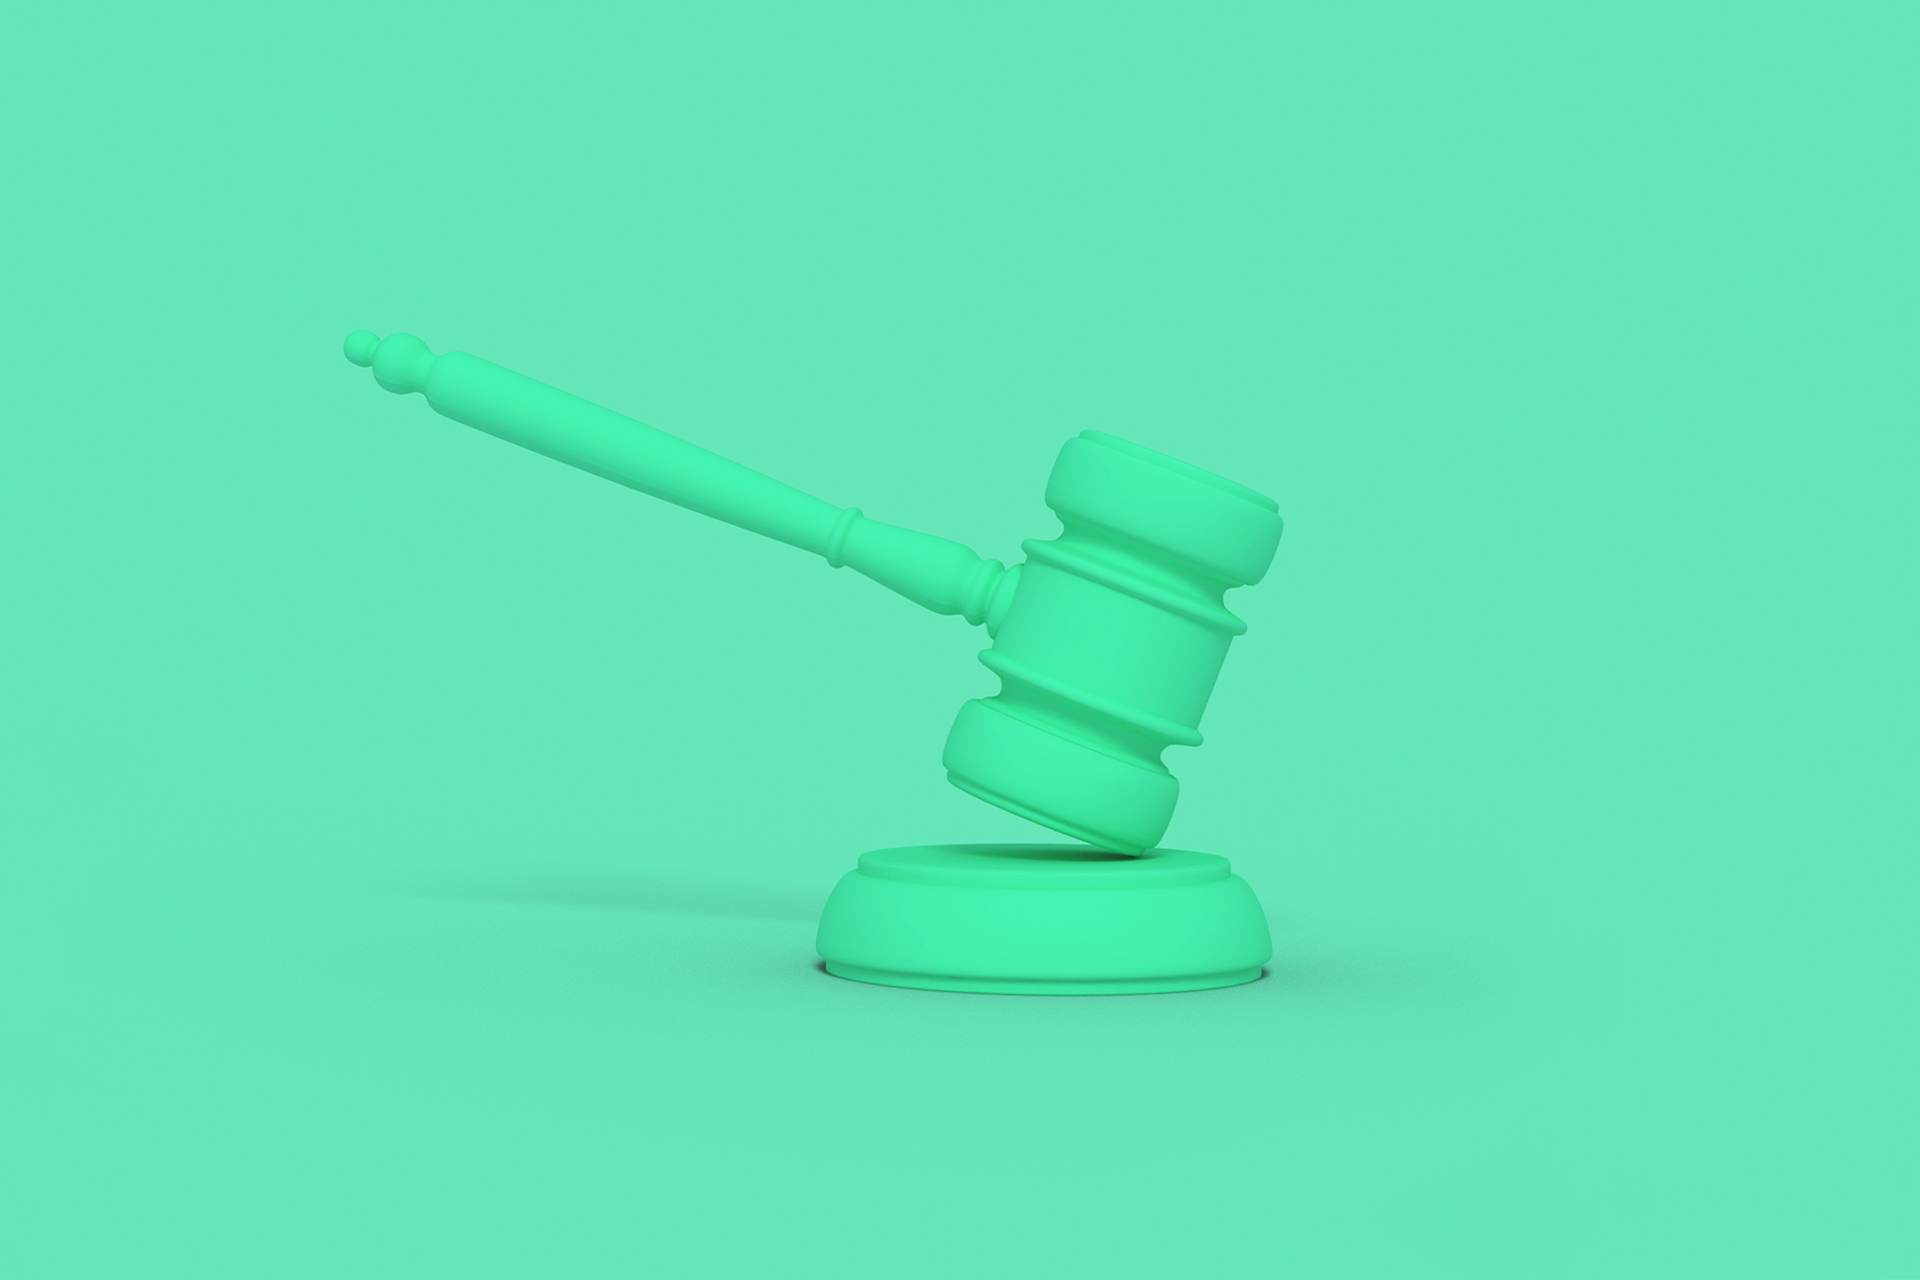 The judgement is in on your PR reputation! A green cartoon gavel is pictured being stuck down against a green backdrop